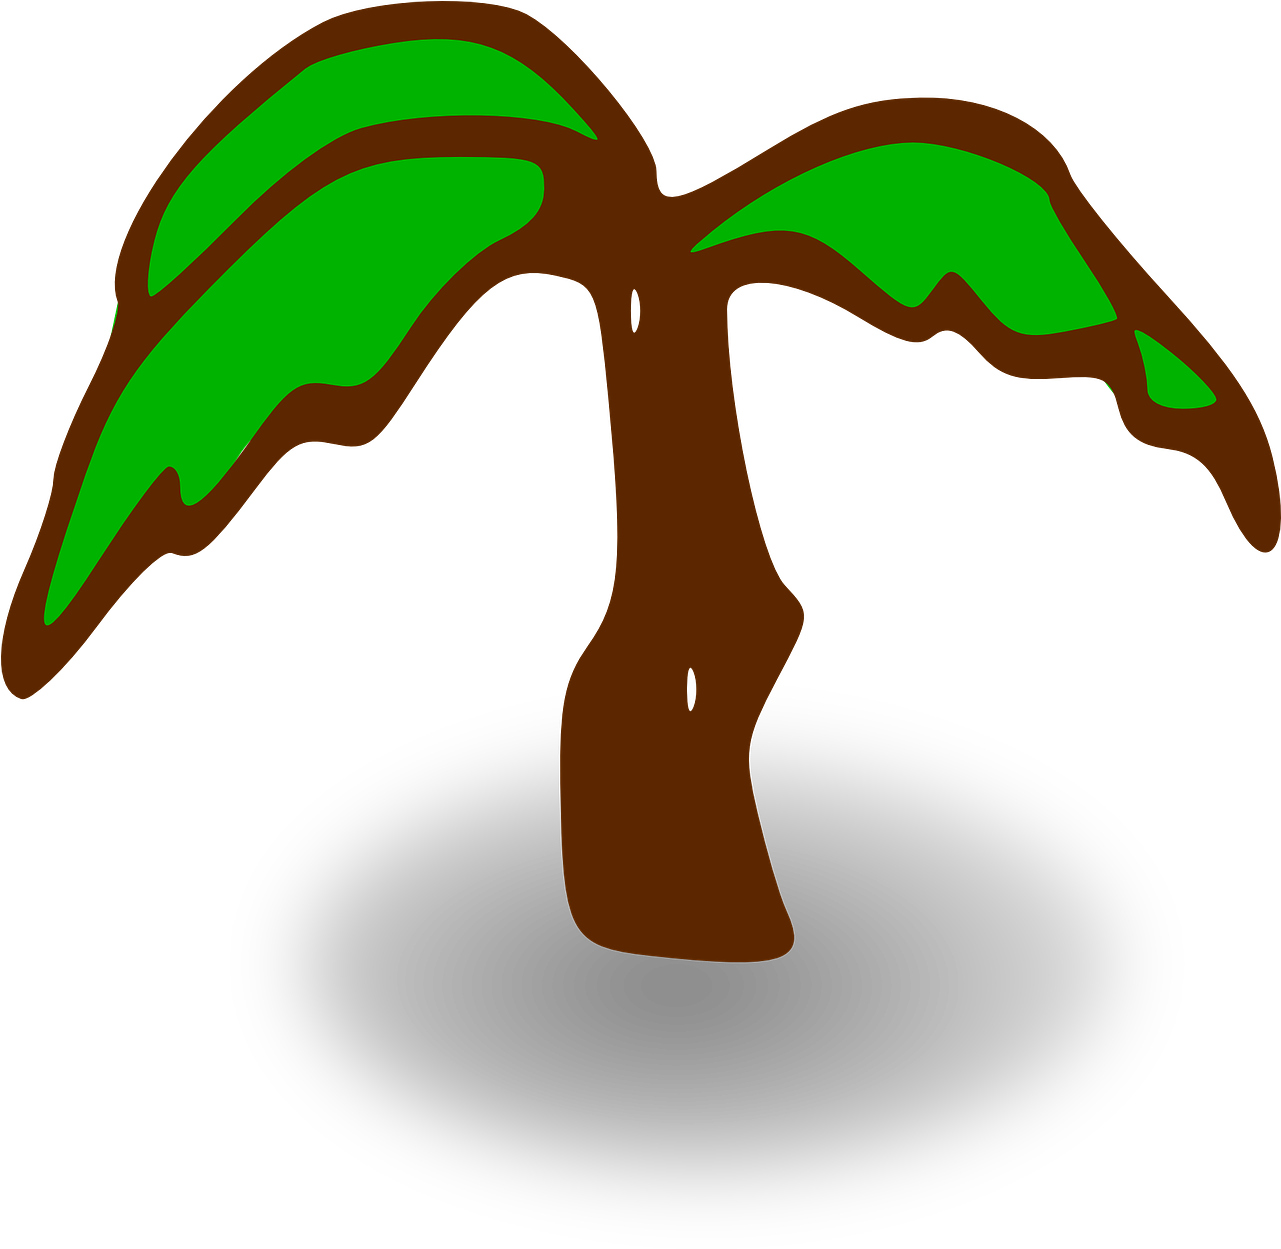 Stylized Palm Tree Graphic PNG image